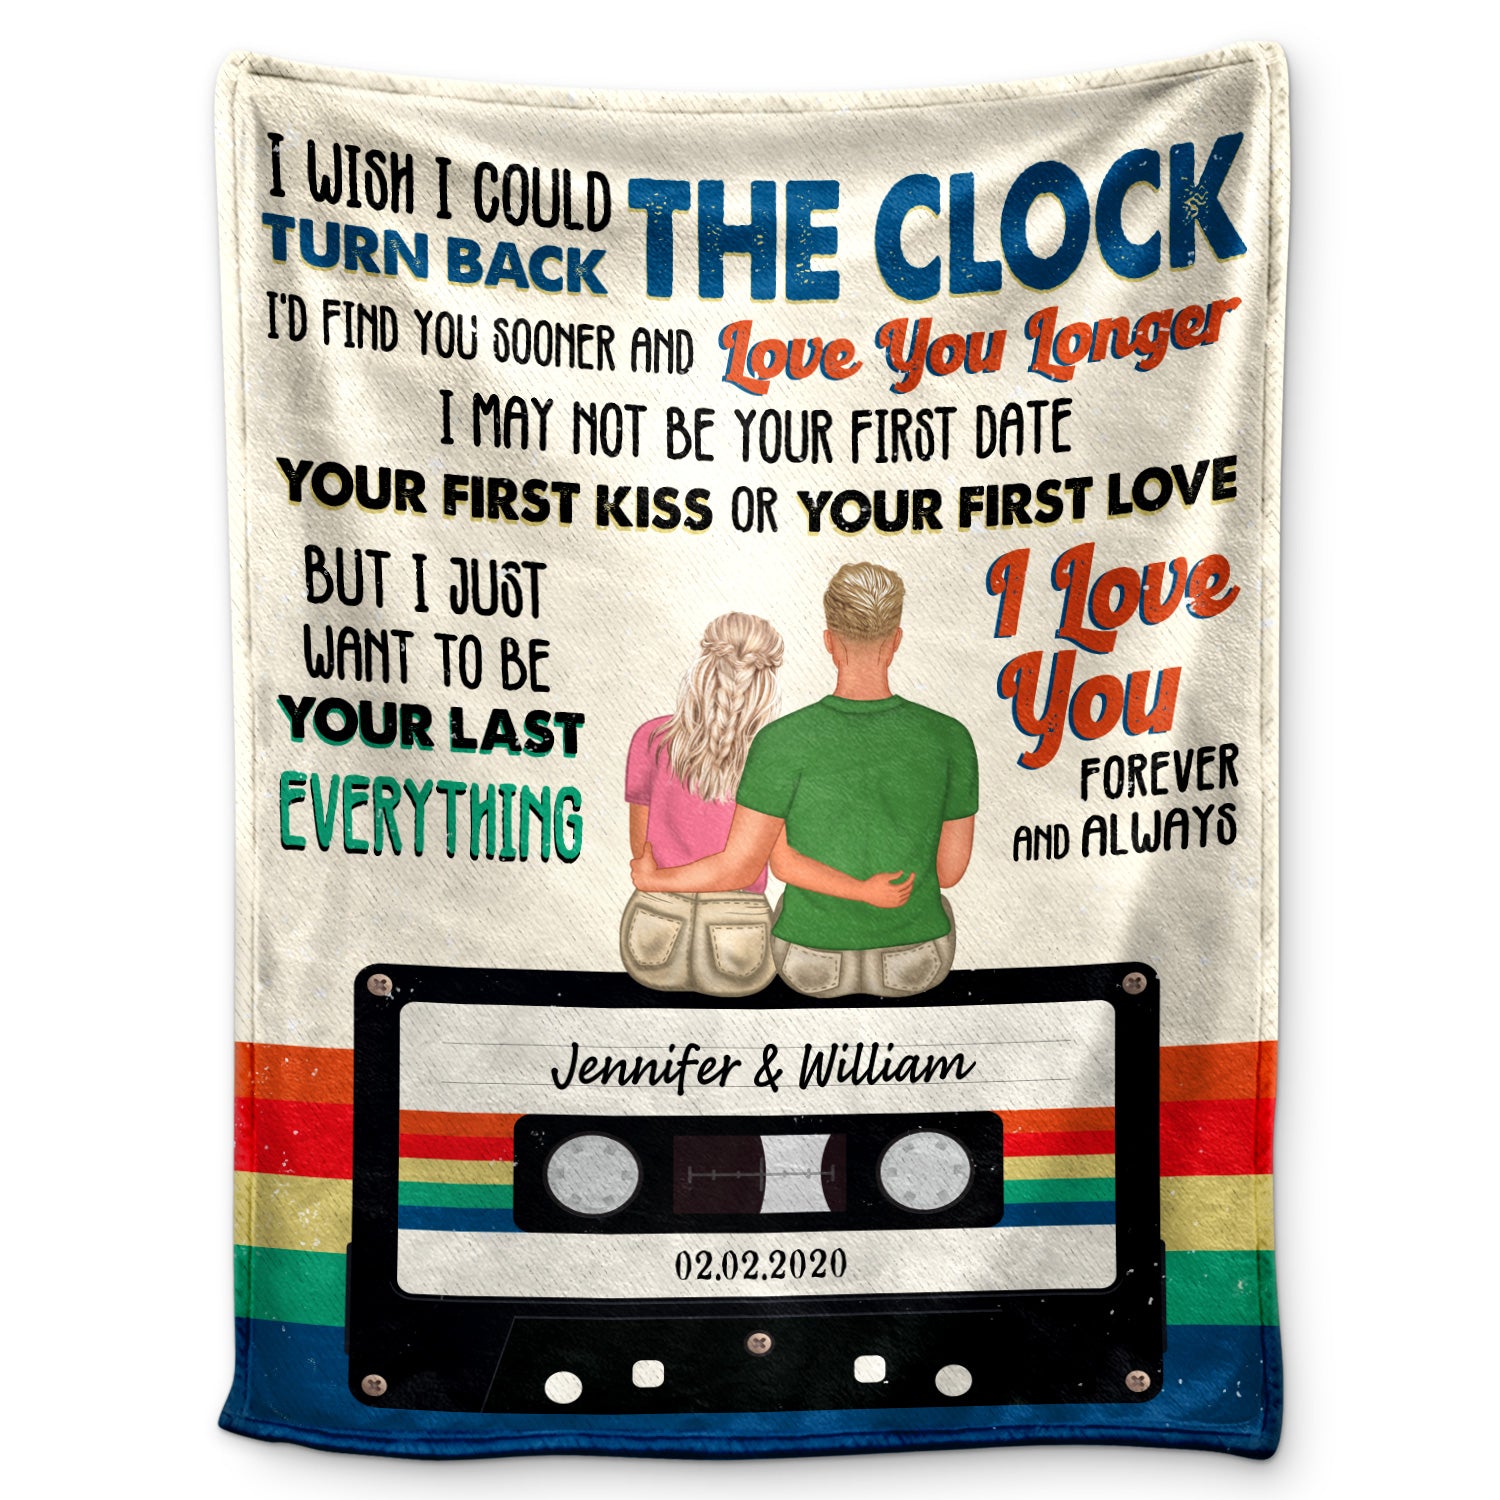 Turn Back The Clock - Gift For Couples - Personalized Fleece Blanket